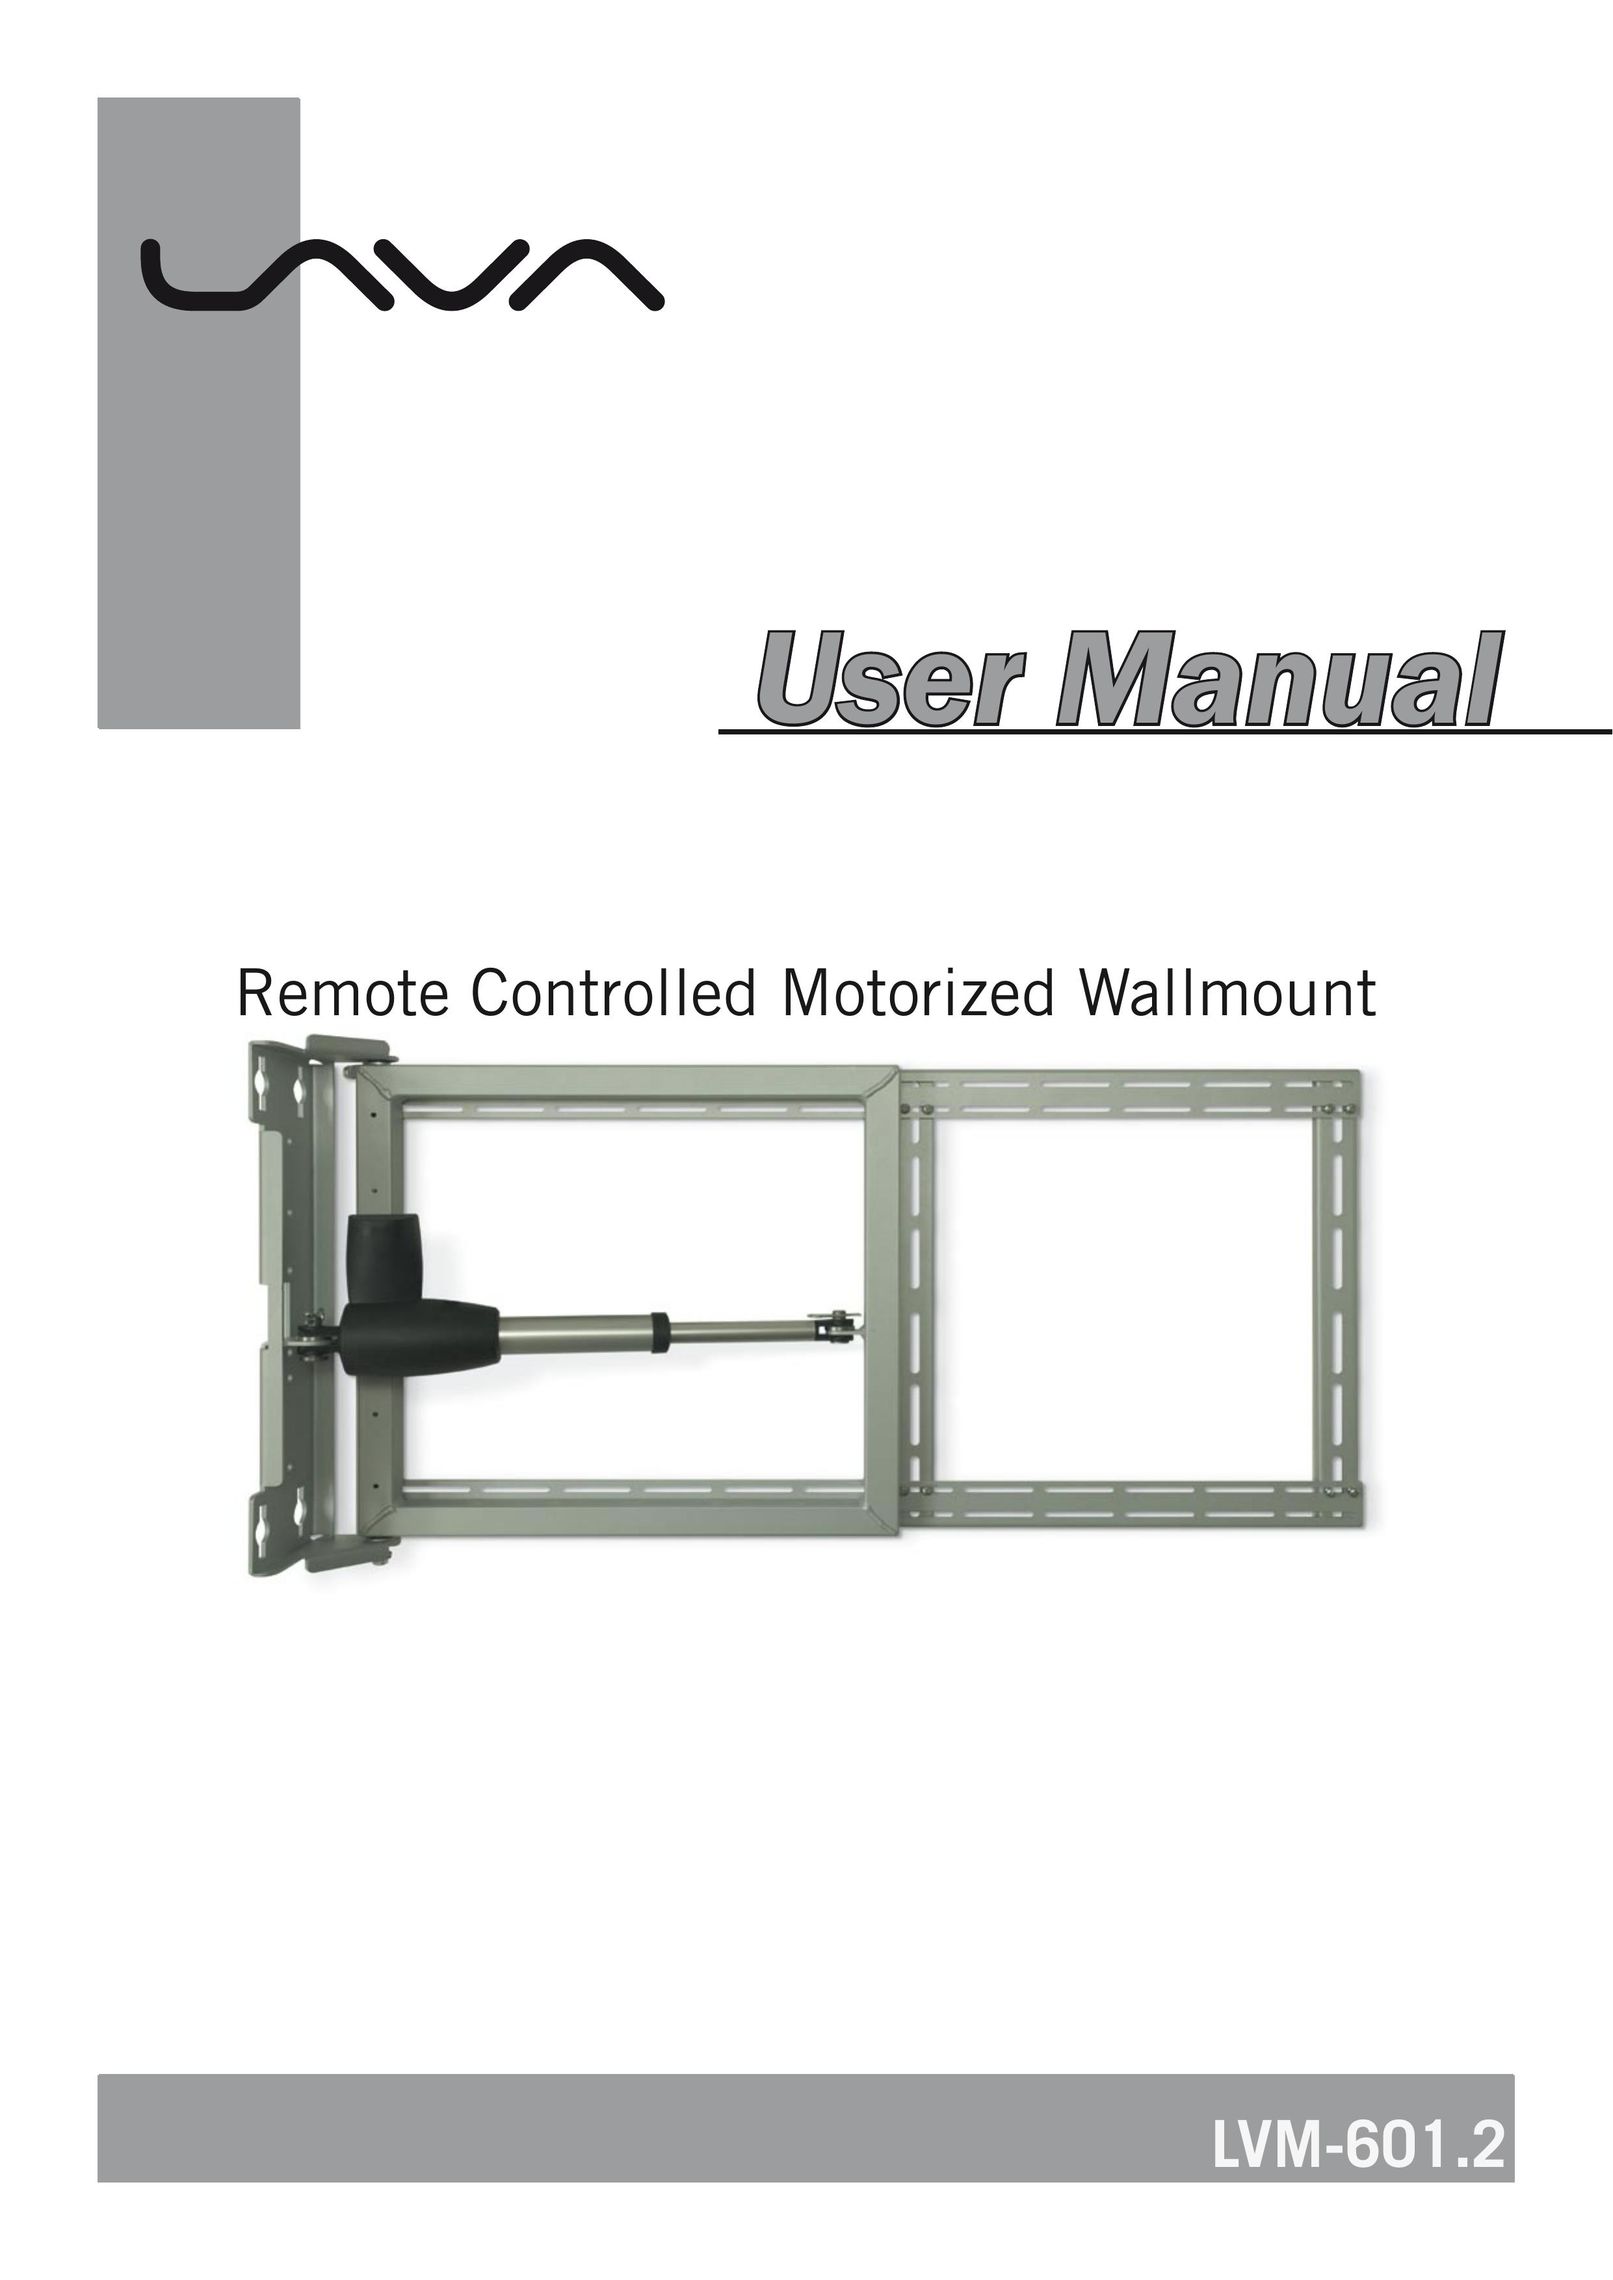 CLO Systems LVM-601-2 Universal Remote User Manual